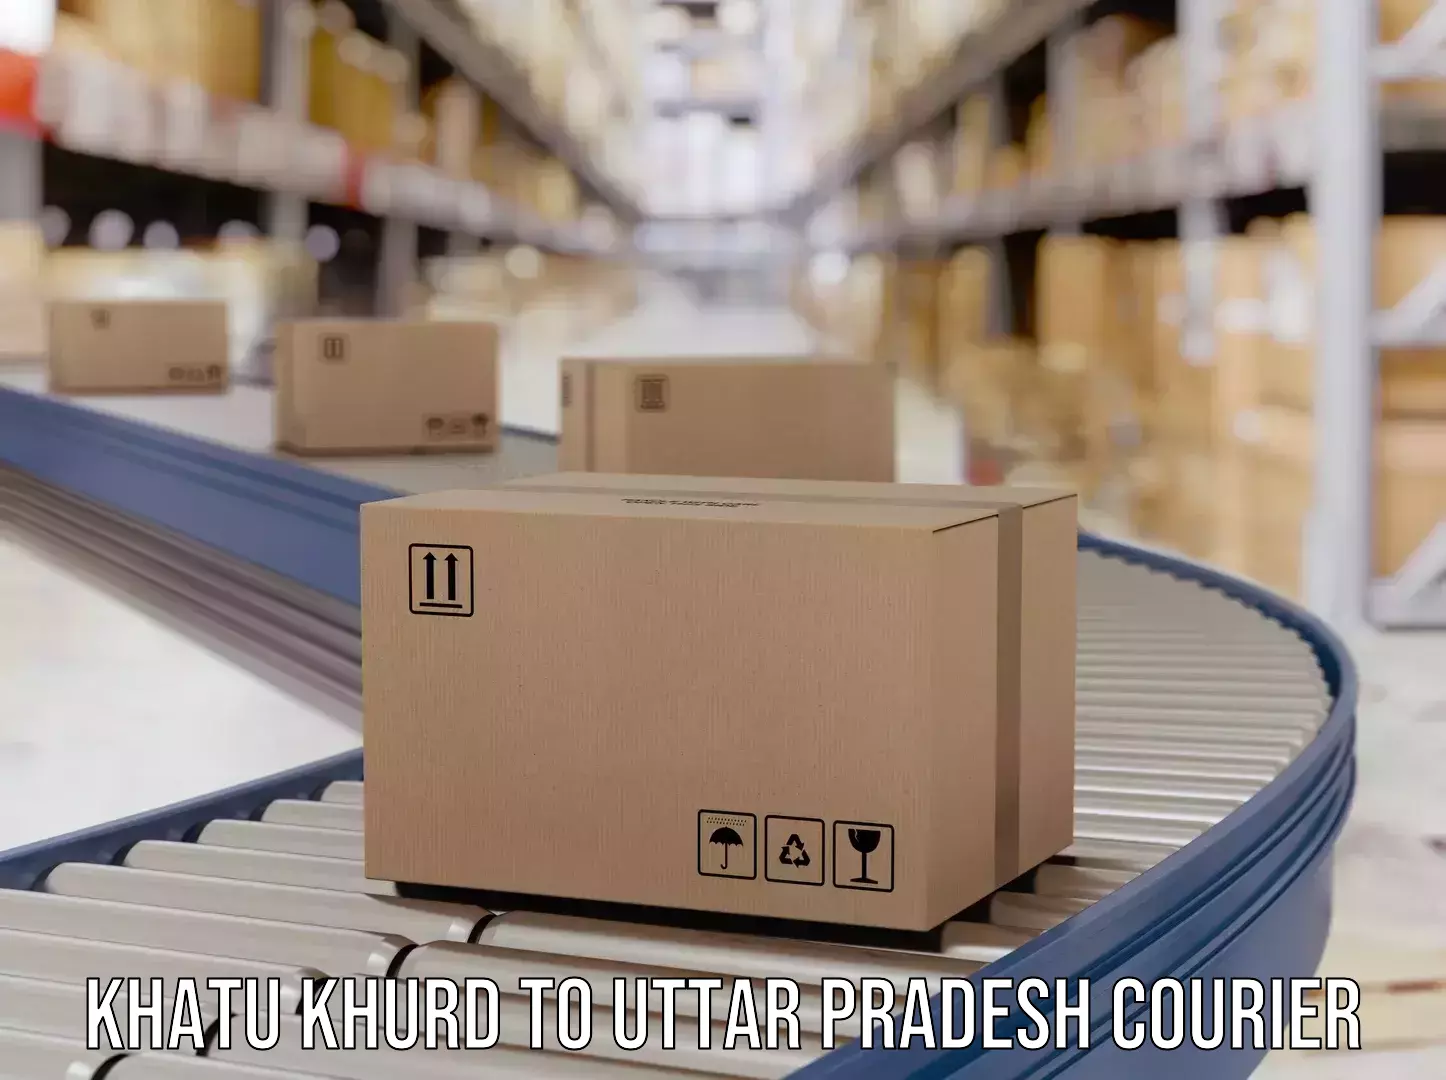 Same-day delivery solutions Khatu Khurd to Orai